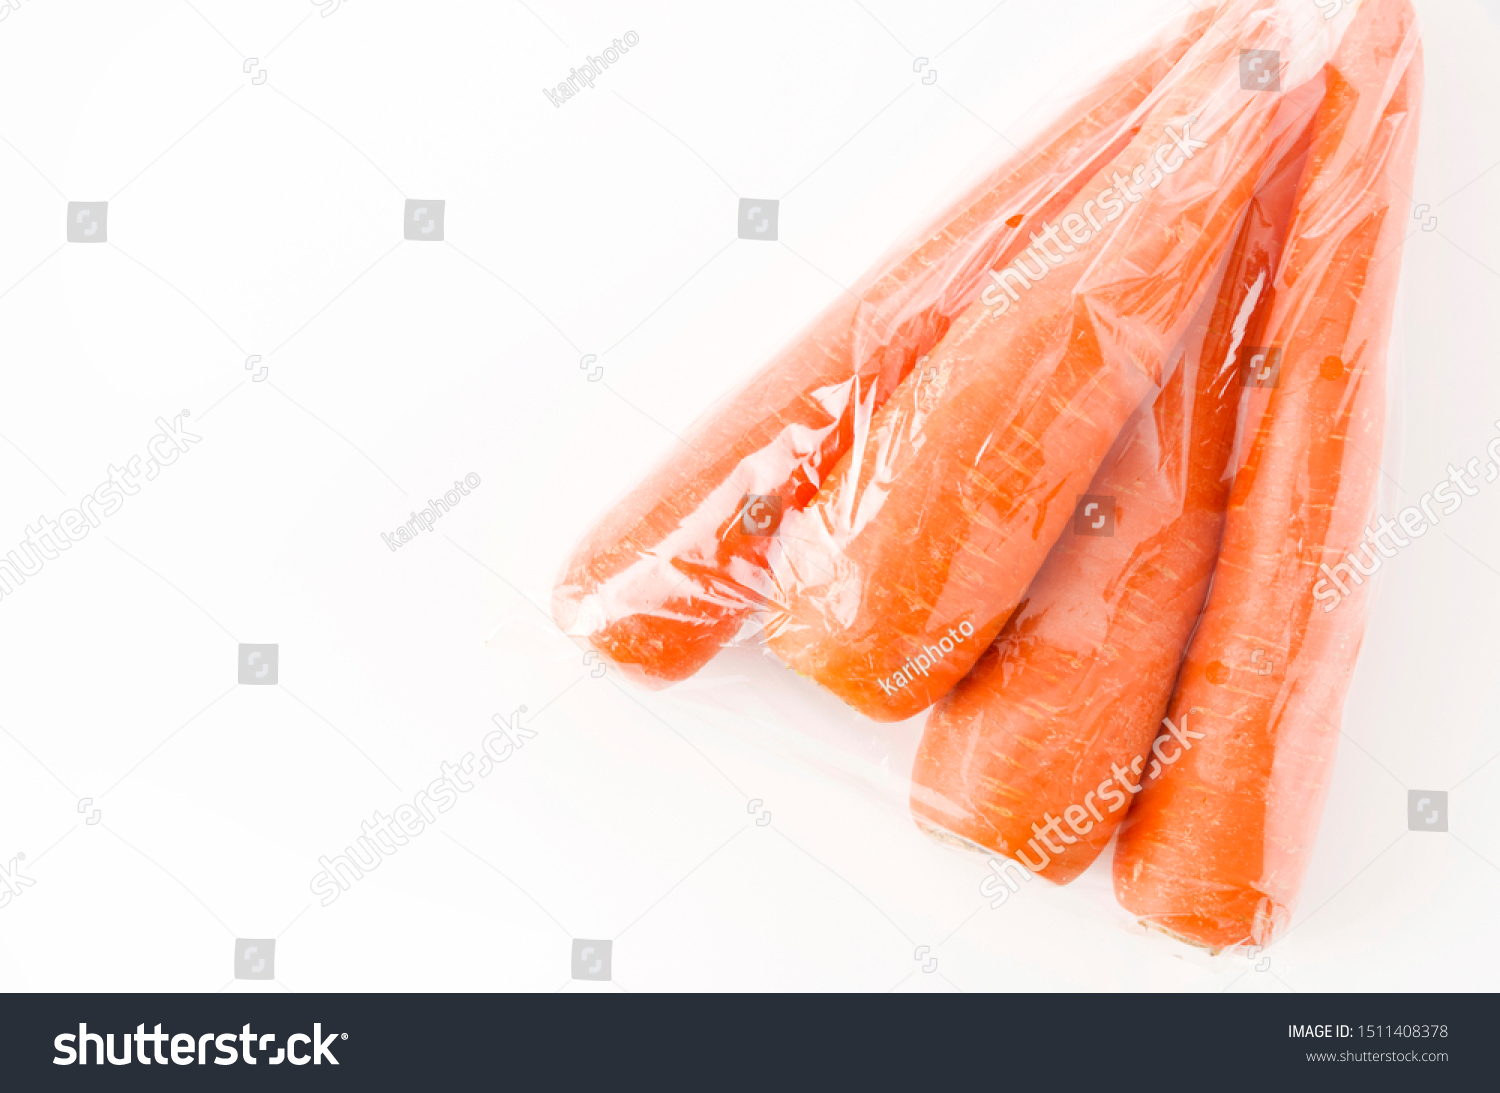 Download Fresh Carrot Plastic Bag On White Stock Photo Edit Now 1511408378 Yellowimages Mockups